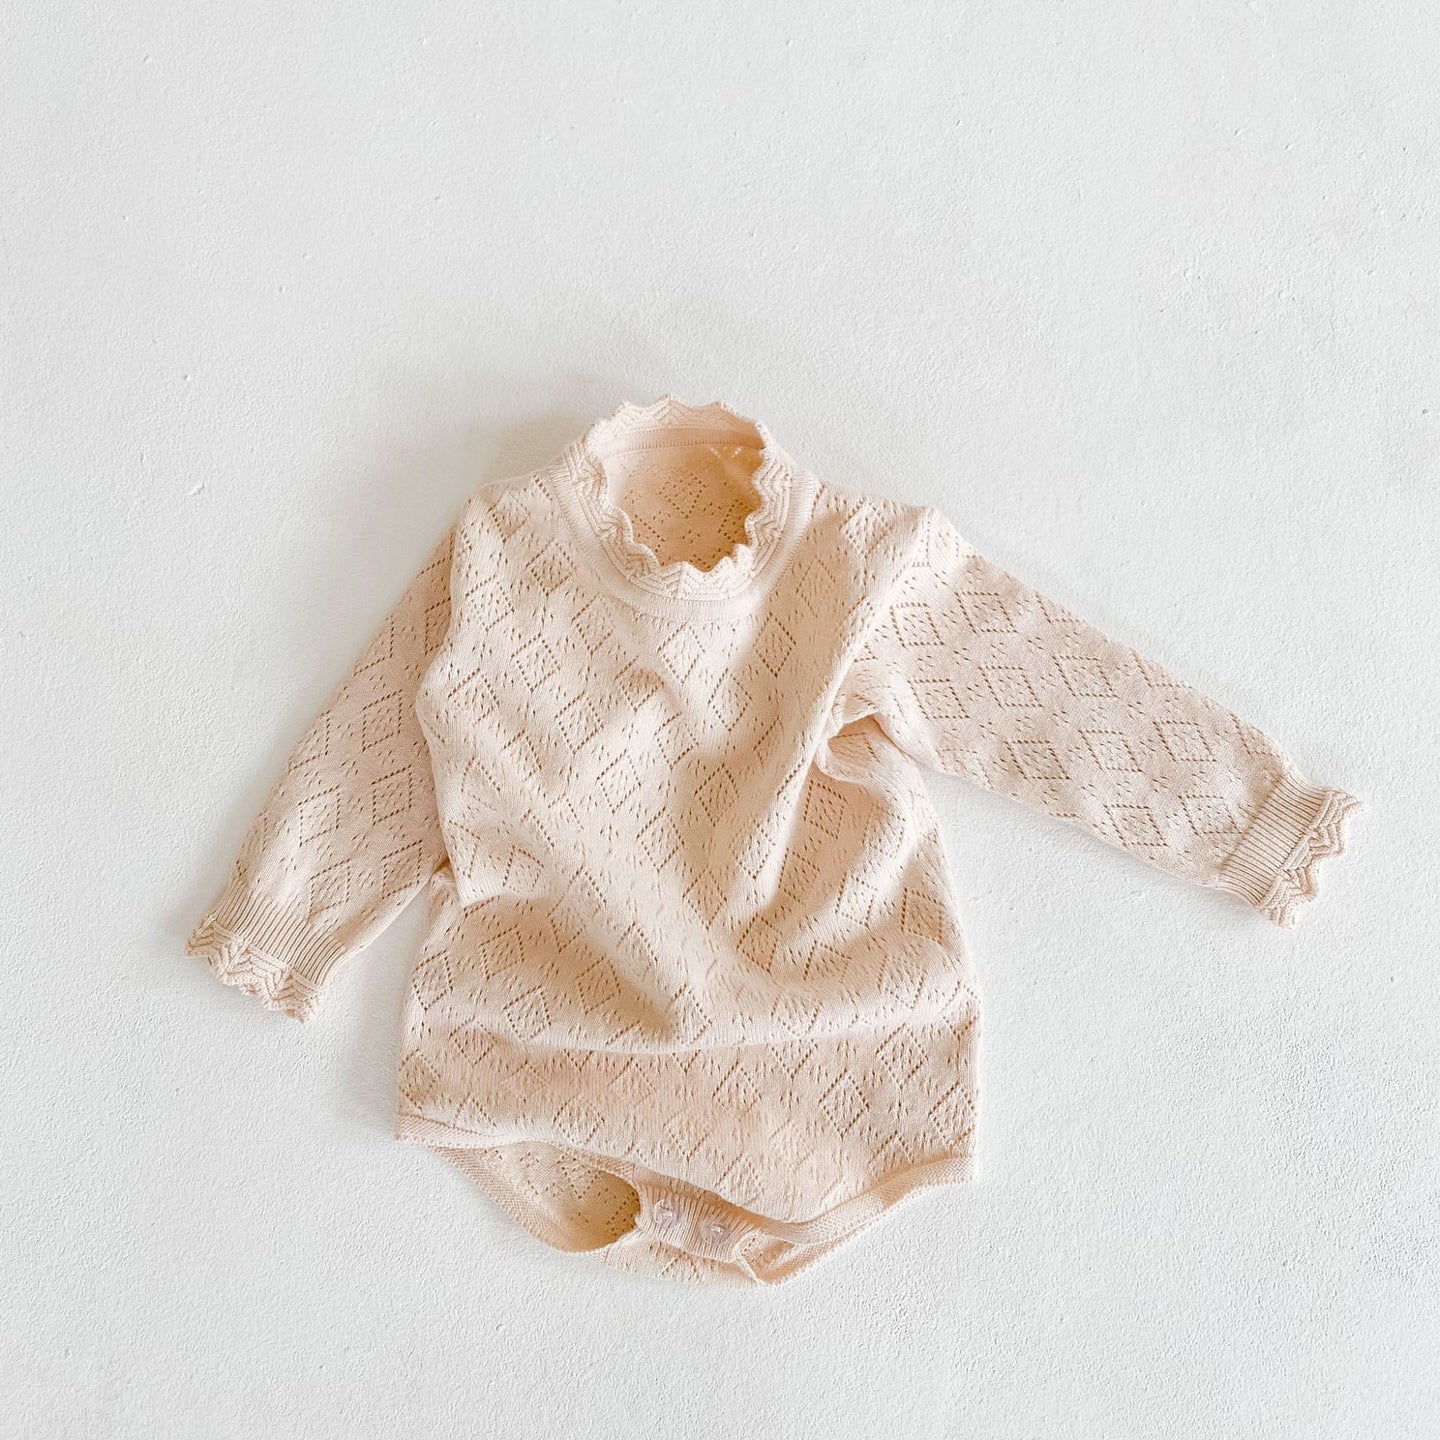 Lace Knitted Long Sleeve Onesie - Cara Mia Kids